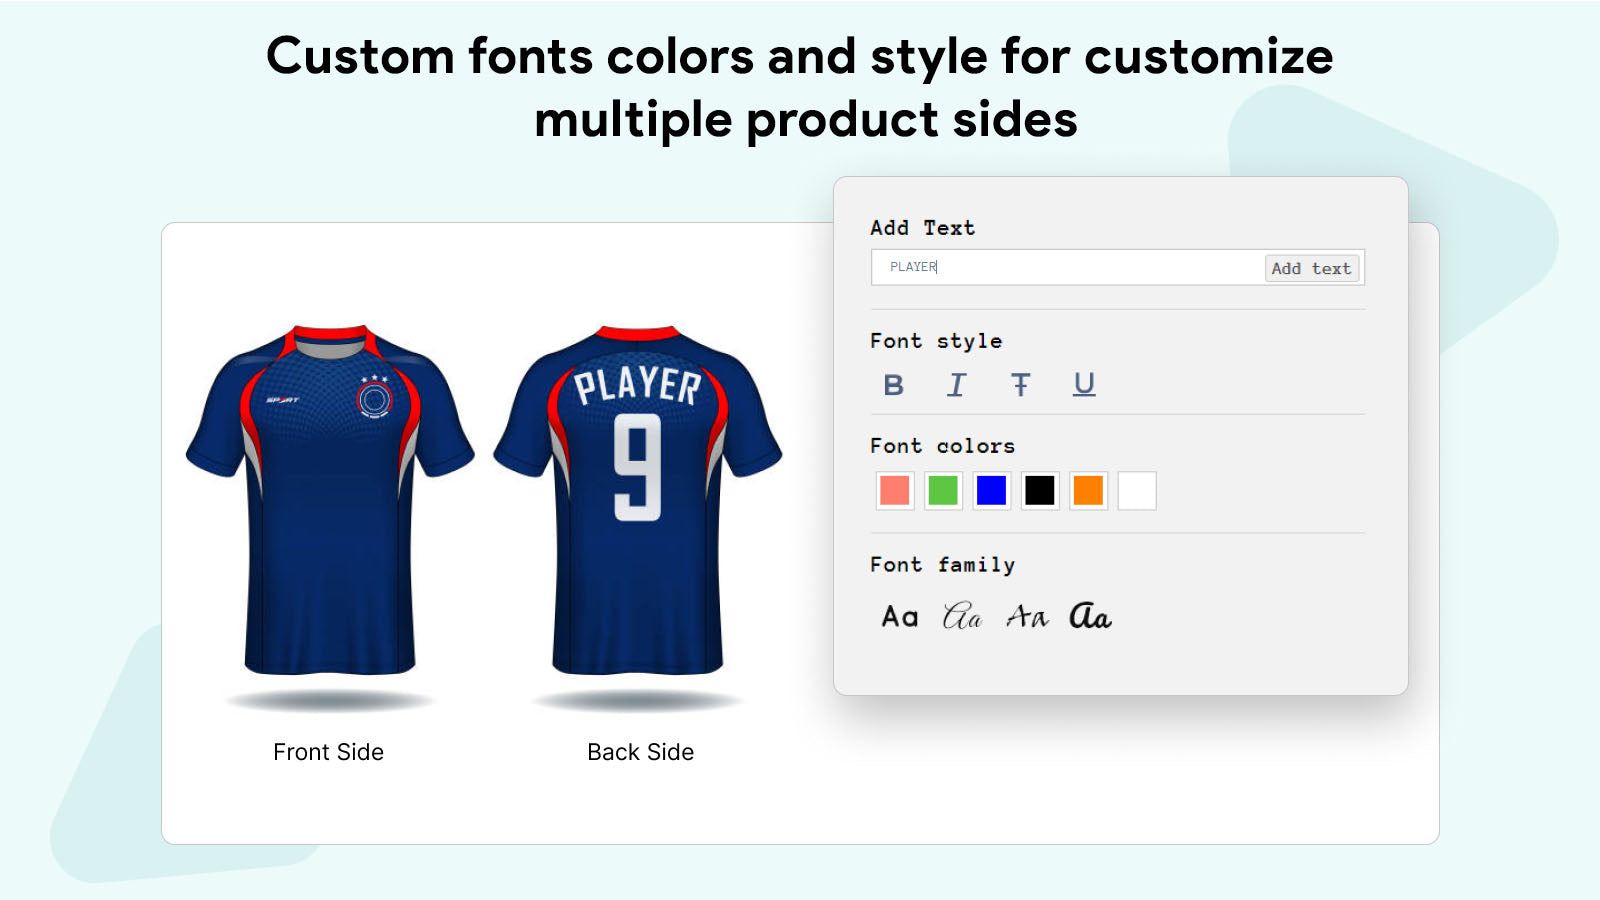 Custom fonts colors and style for multiple product sides